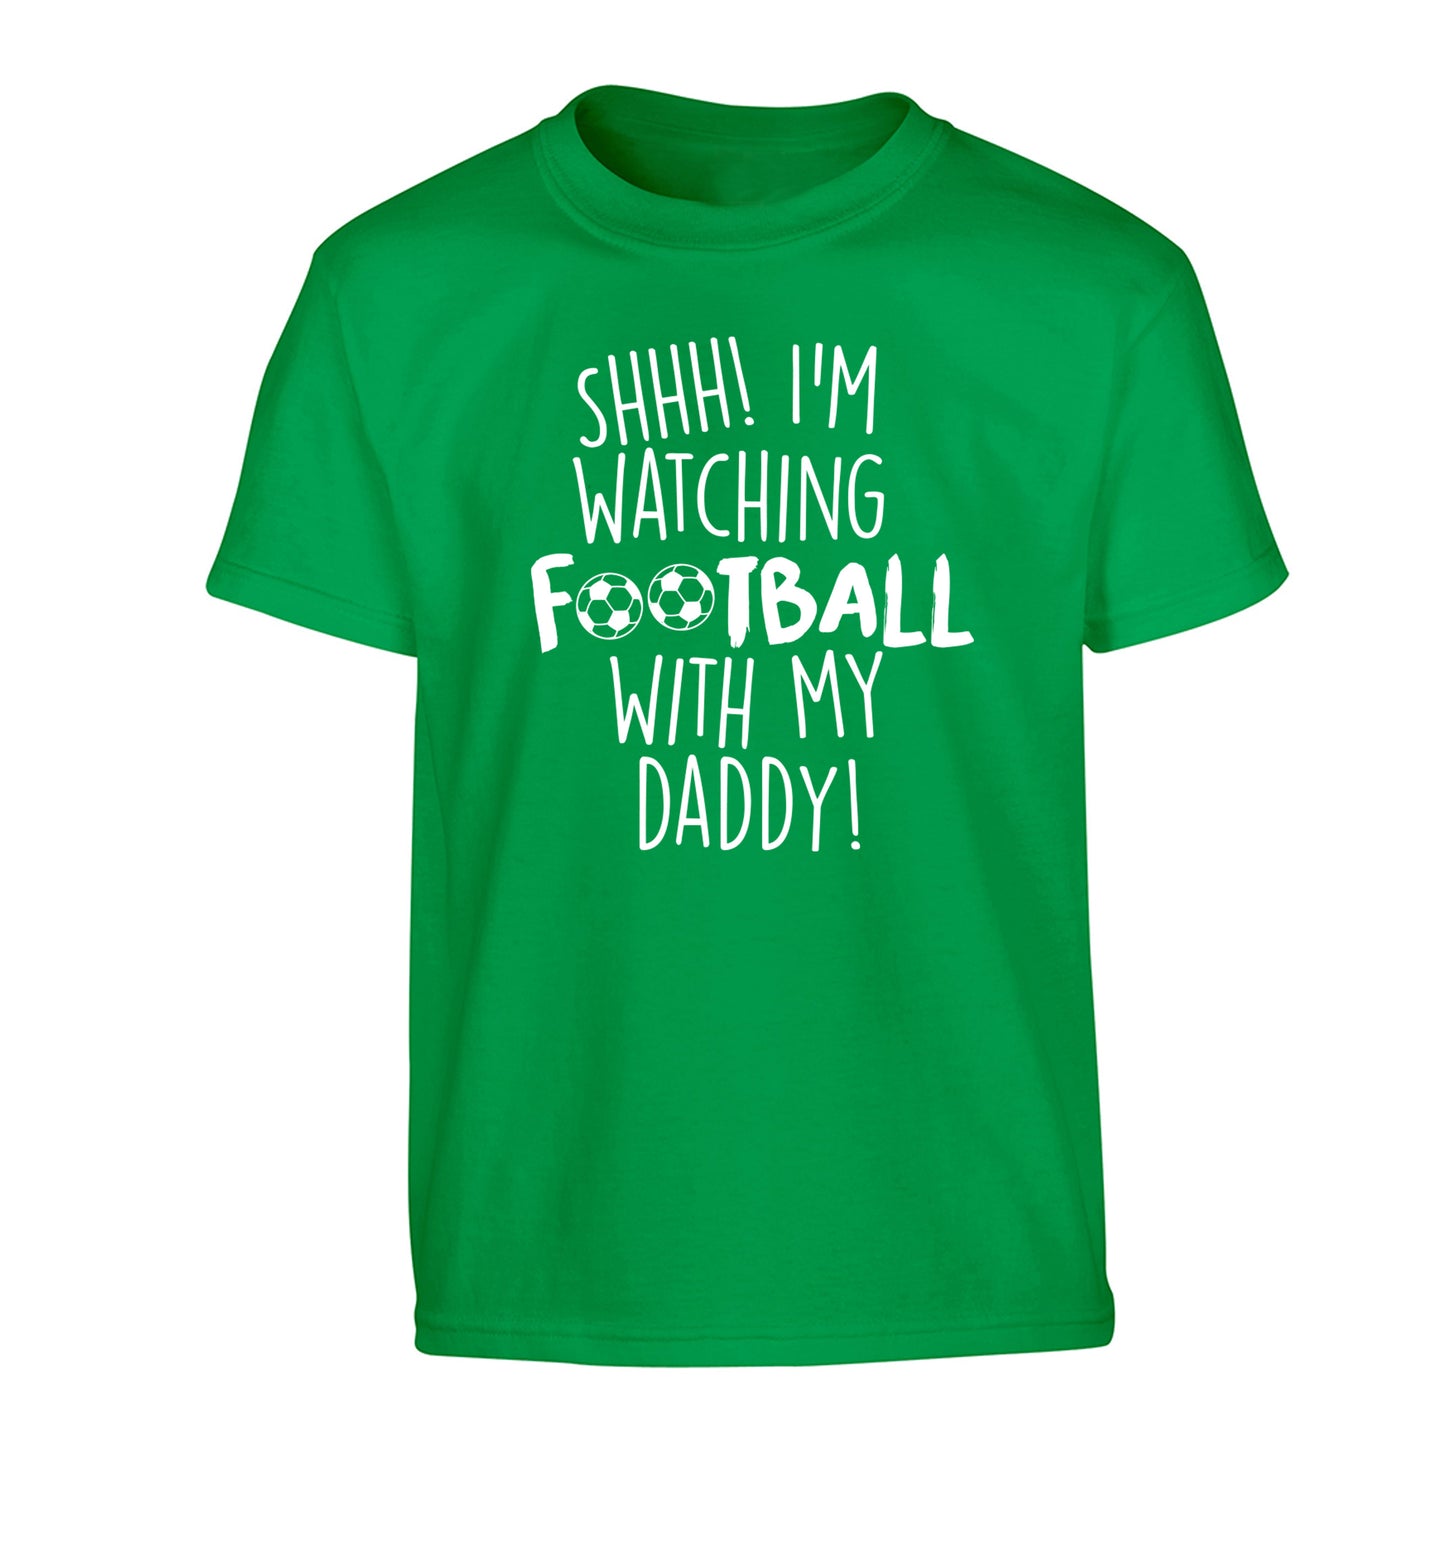 Shhh I'm watching football with my daddy Children's green Tshirt 12-14 Years